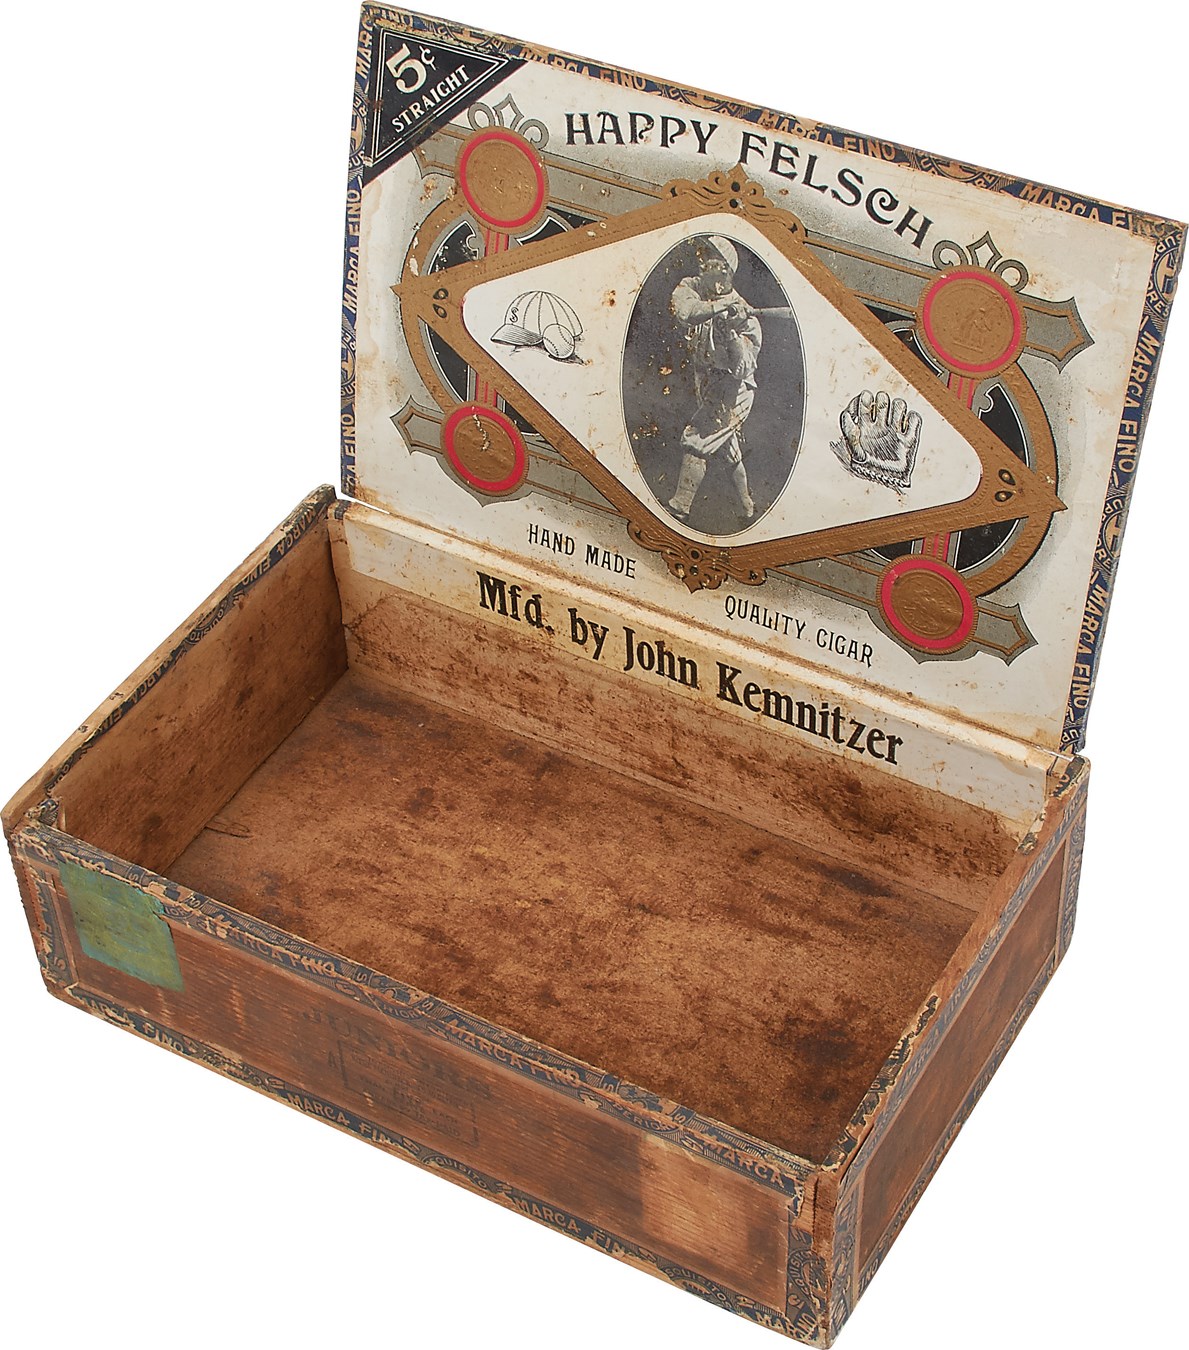 Early Baseball - Happy Felsch 1917 World Champion Chicago White Sox Baseball Cigar Box - Only One Known